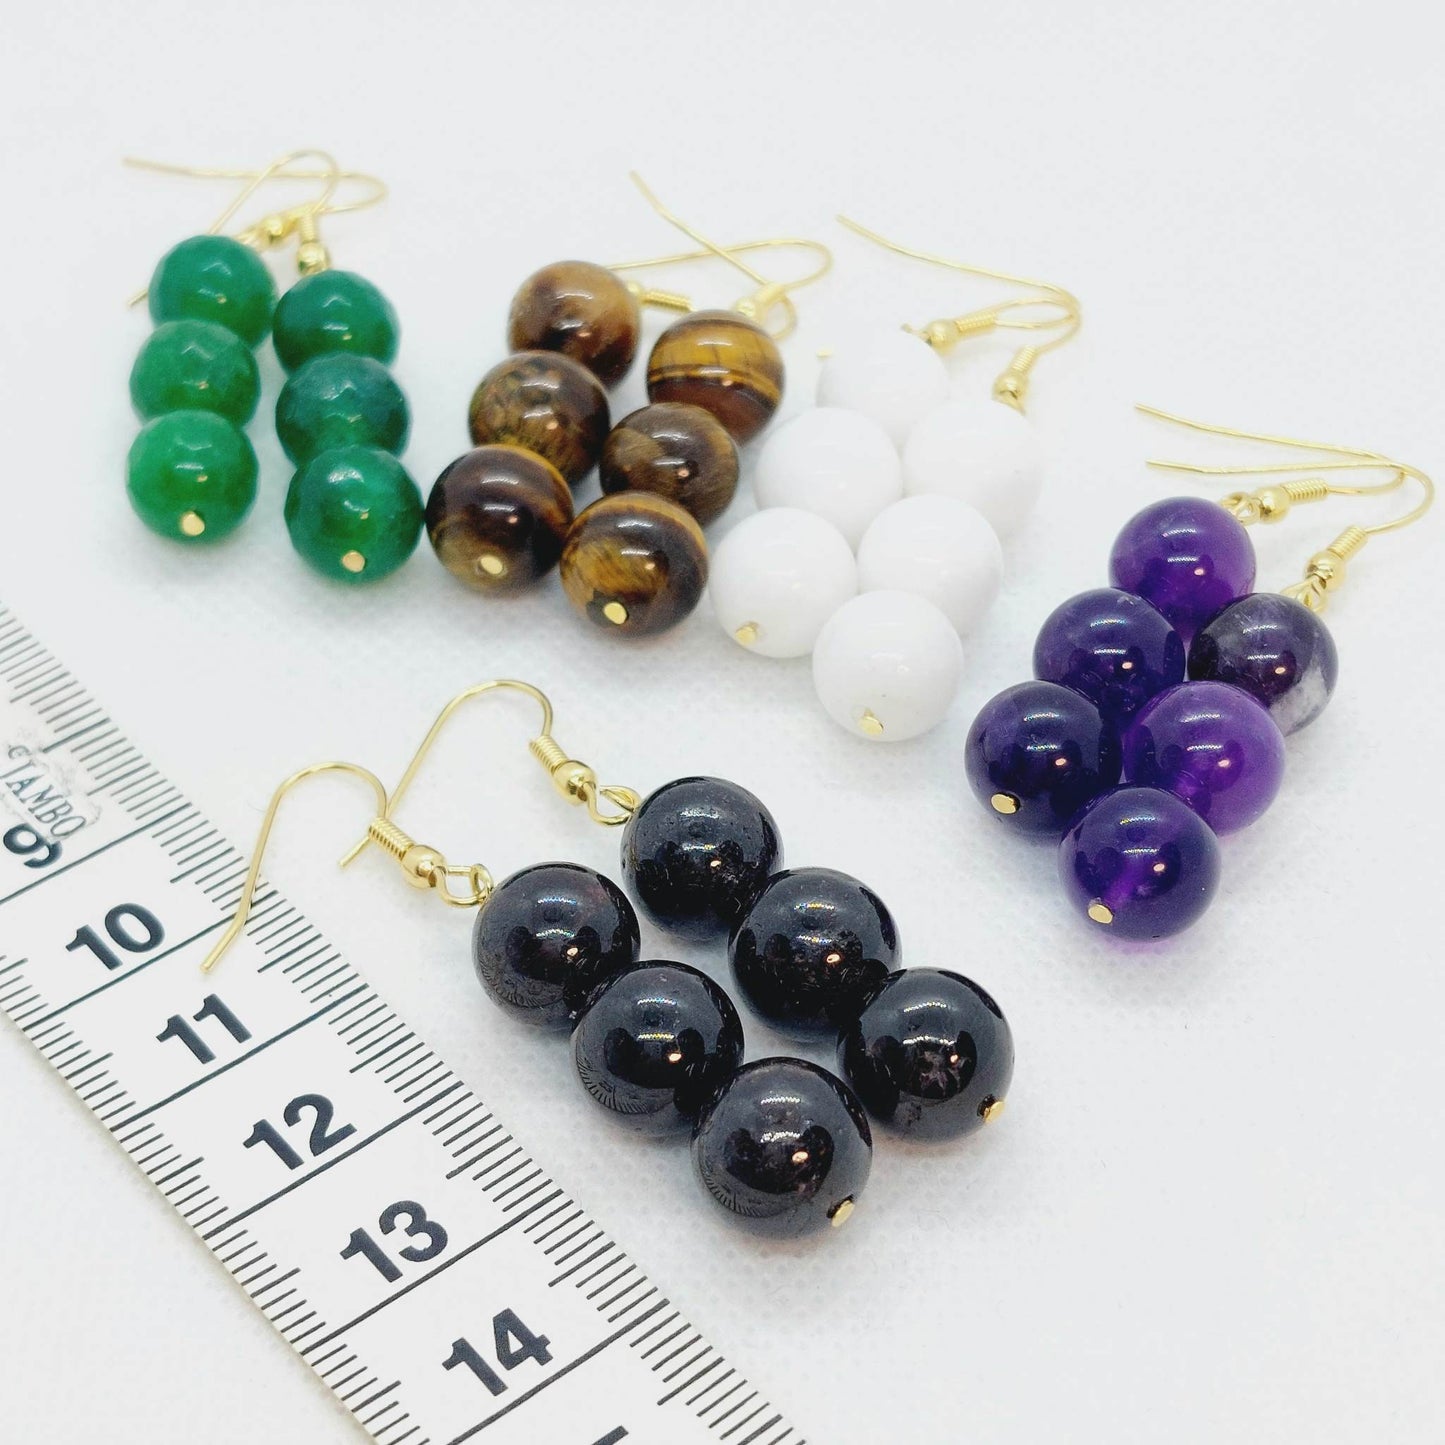 Porcelain Dangle Earrings with 10mm Stones in Stainless Steel Gold Plated